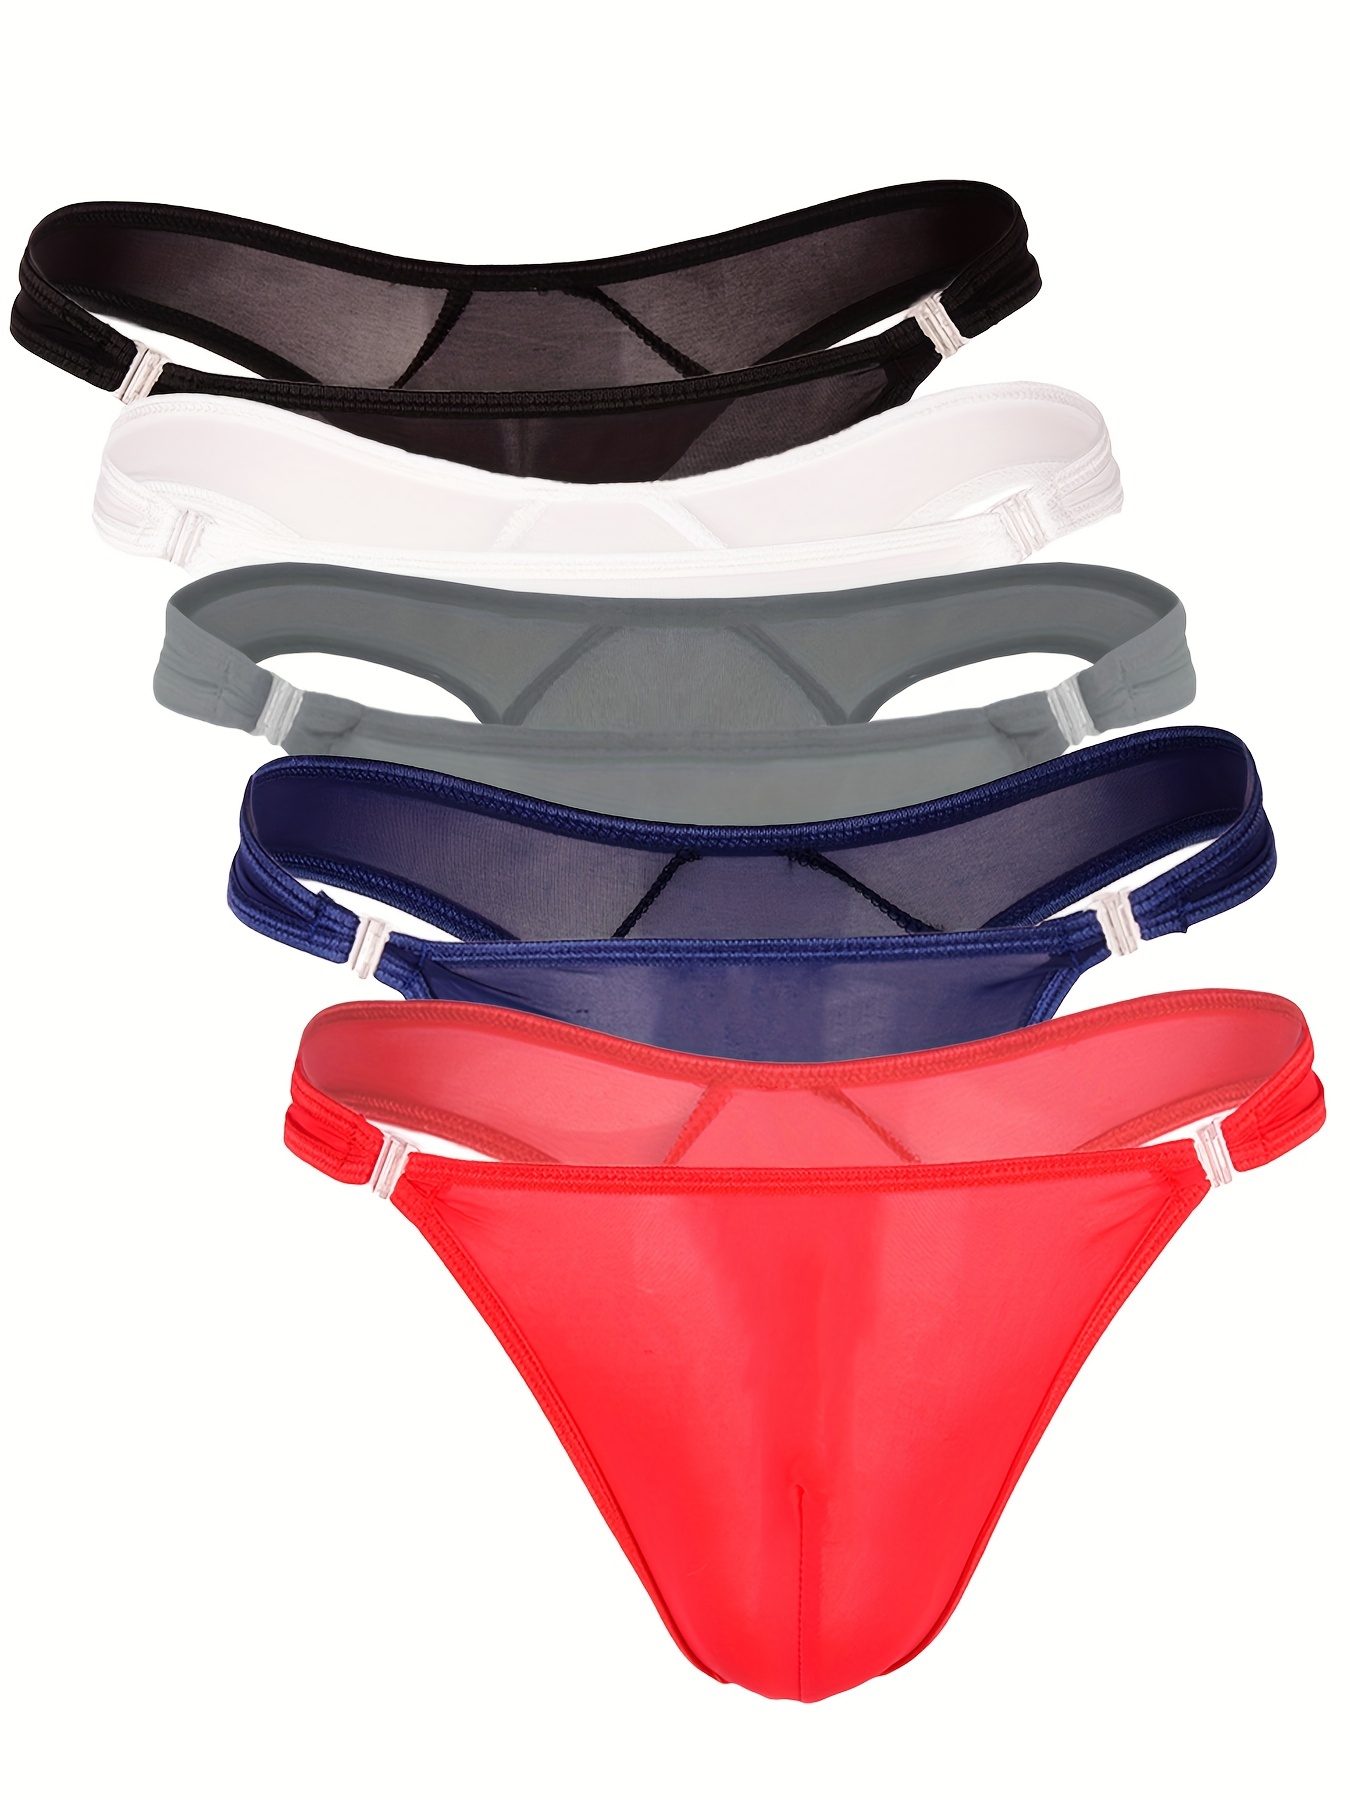 Mens Patent Leather Thong Low Rise Cutout Bulge Pouch G-String Underwear  Hollow Out Sport Supporter Bikini Briefs